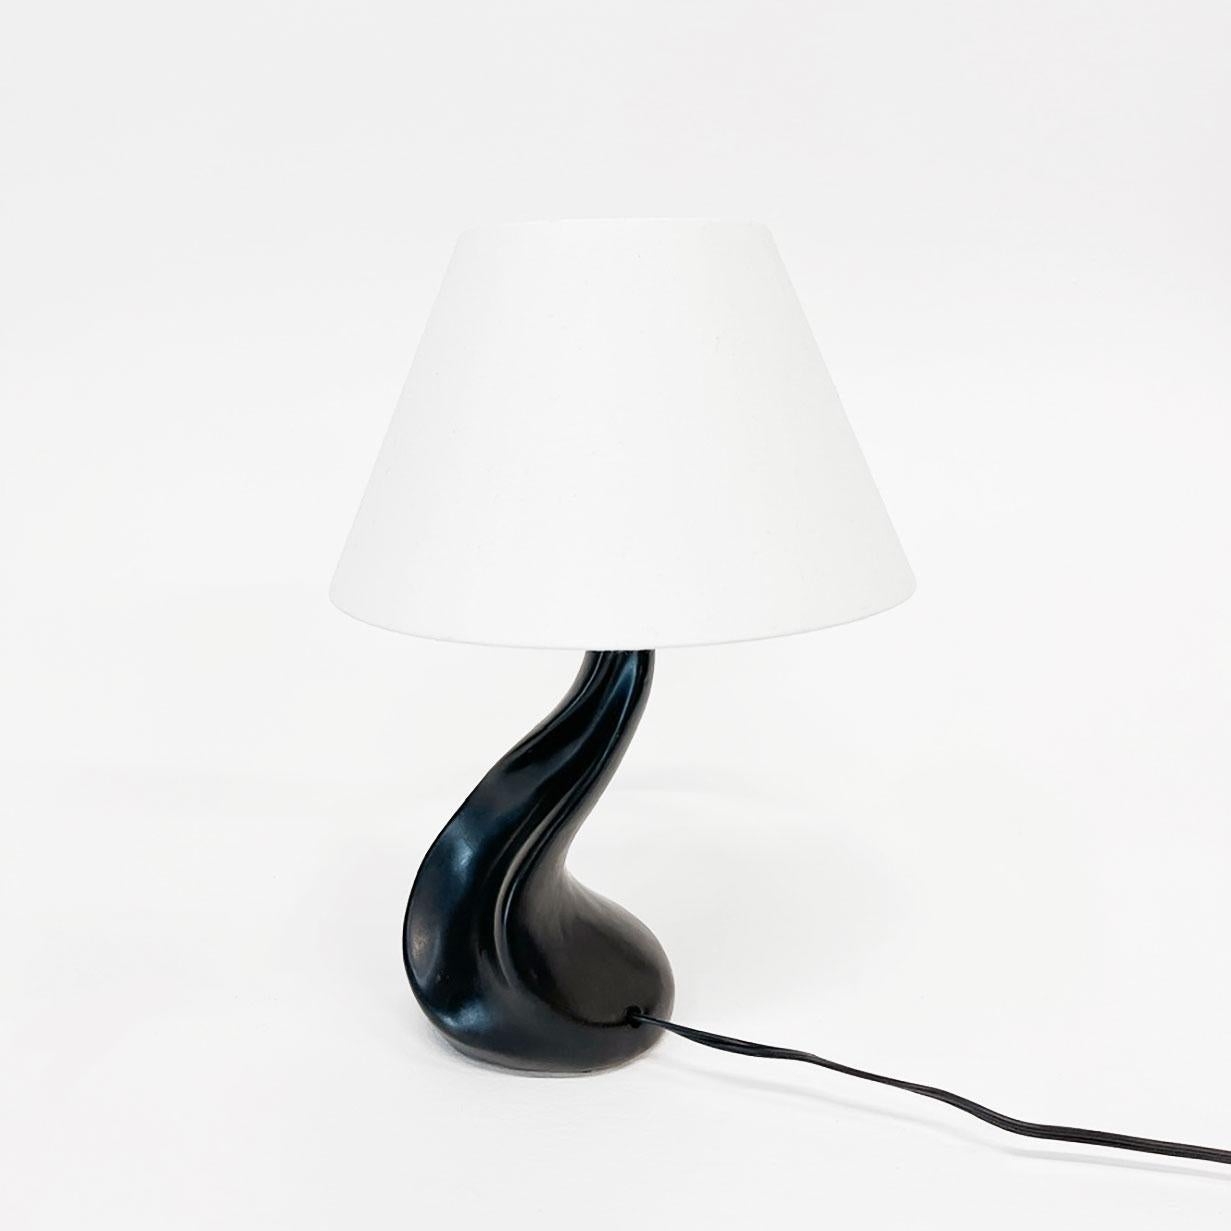 Ceramic organic black table lamp in the style of Jouve, France 1950s.